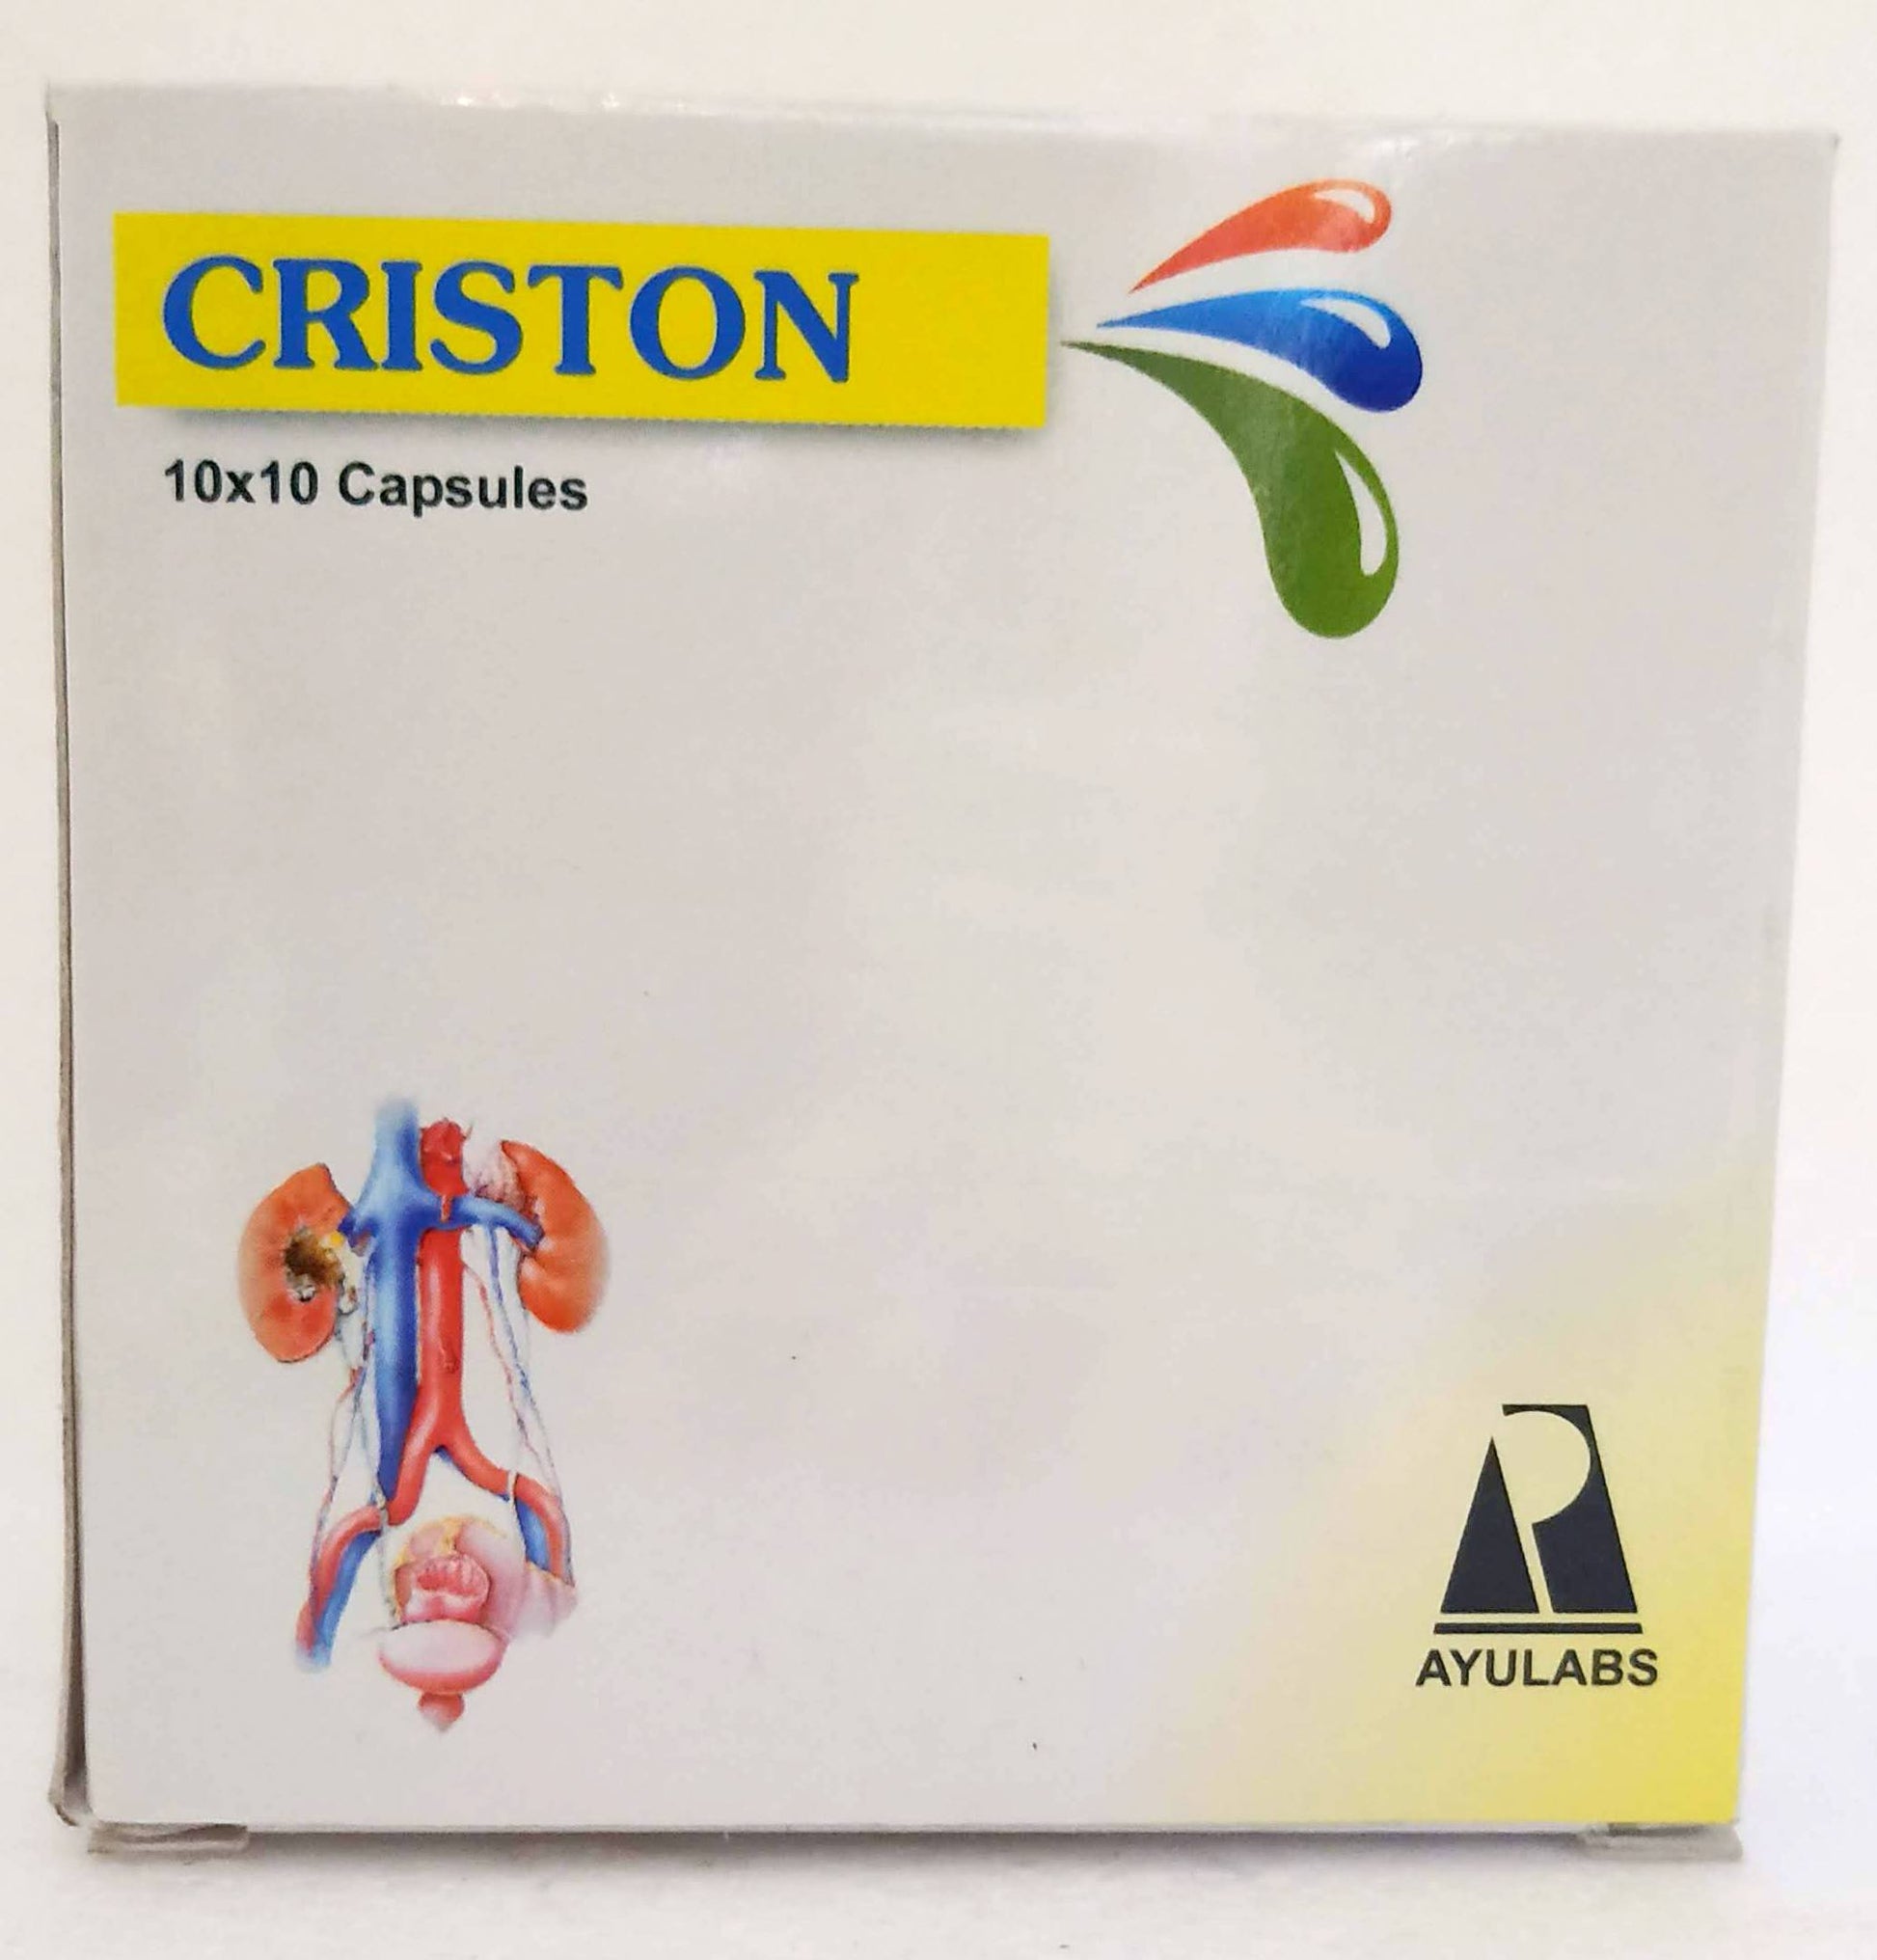 Shop Criston 10Capsules at price 44.00 from Ayulabs Online - Ayush Care